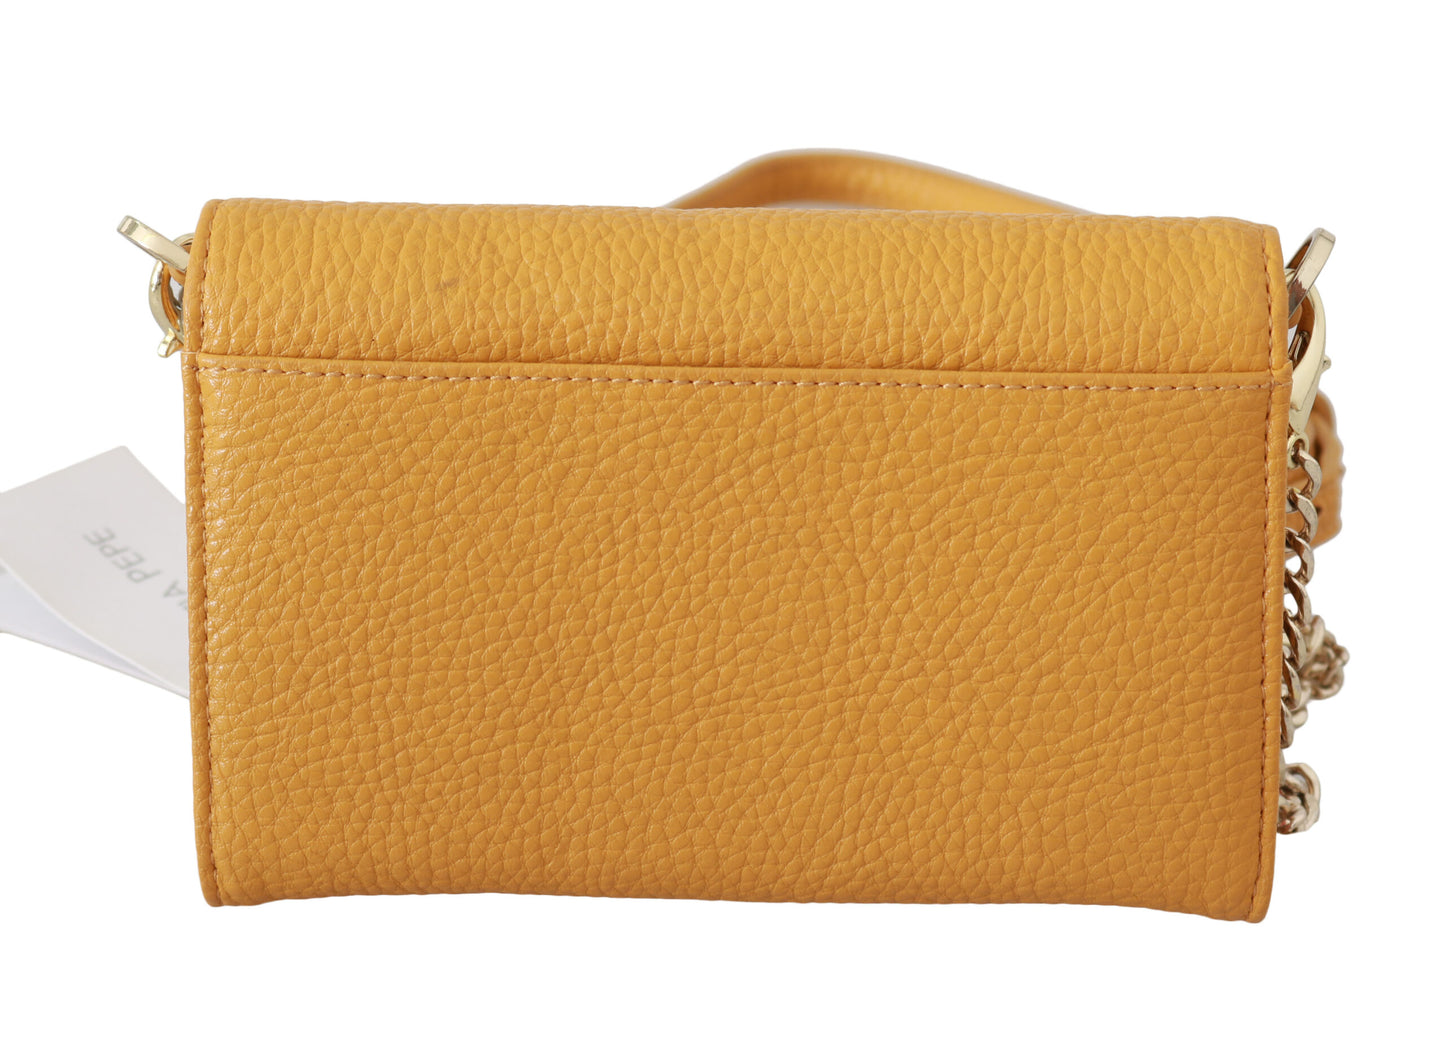 Chic Yellow Leather Shoulder Bag